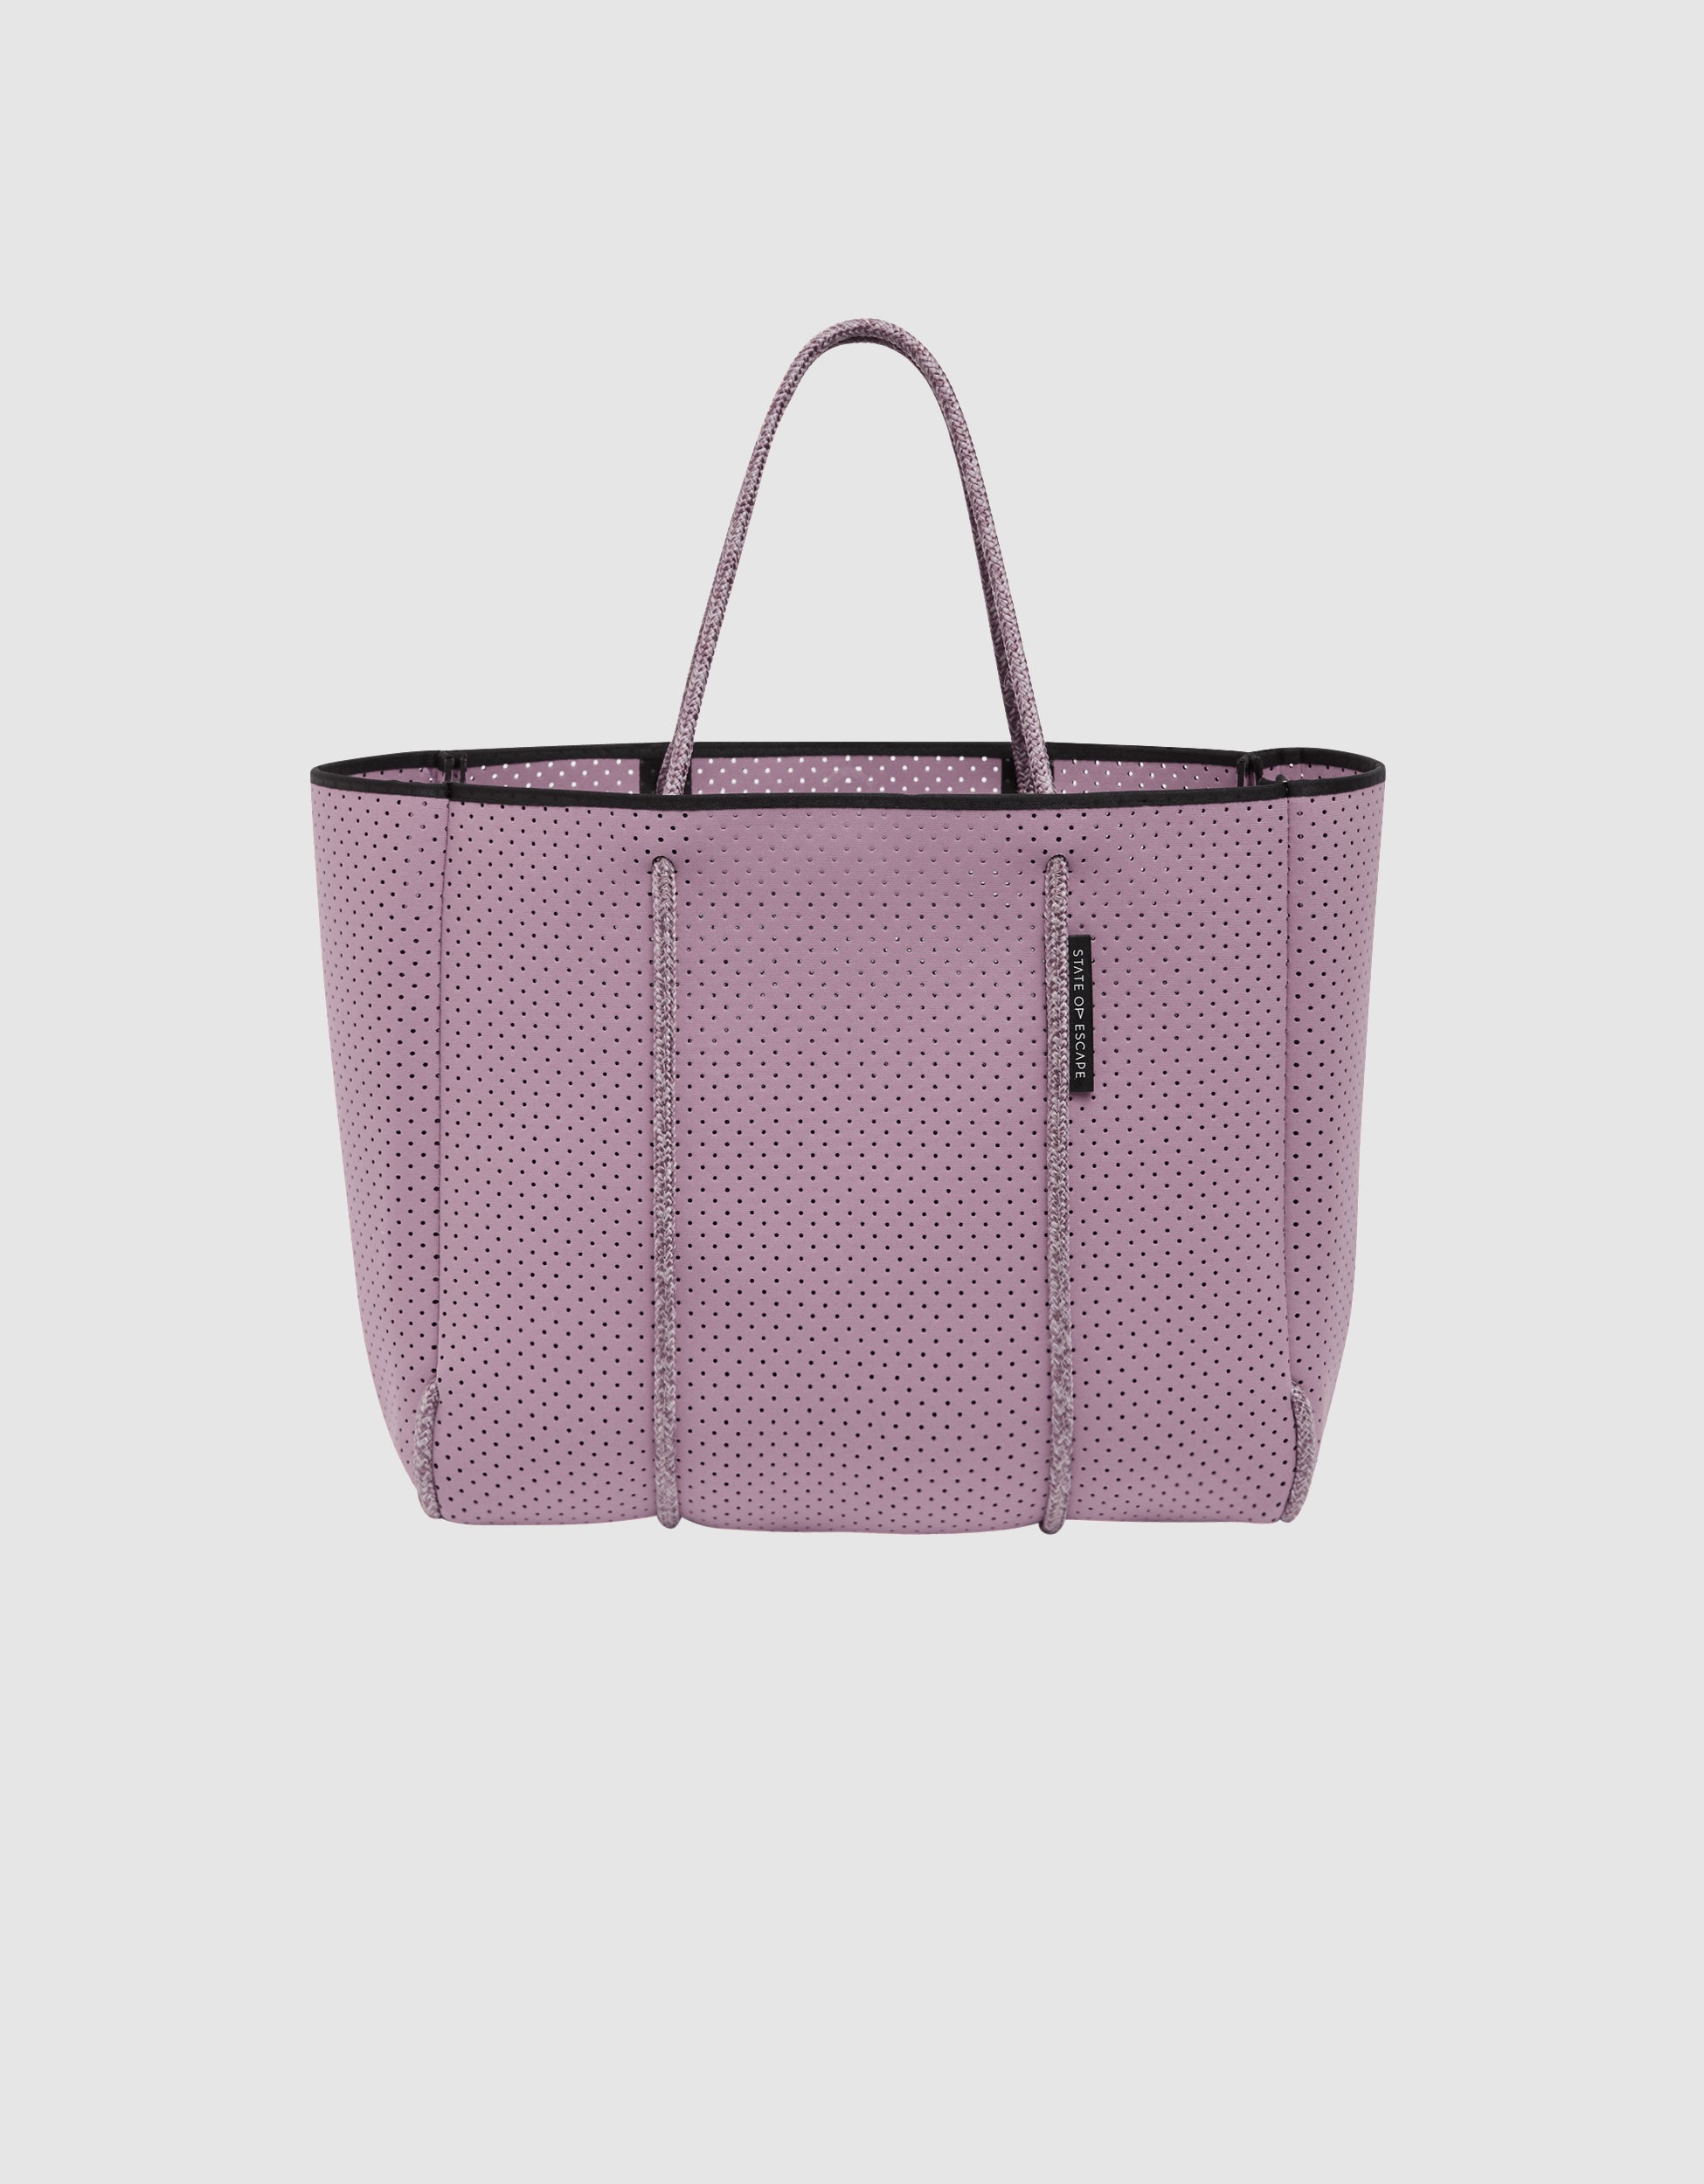 Flying Solo tote in orchid – State of Escape